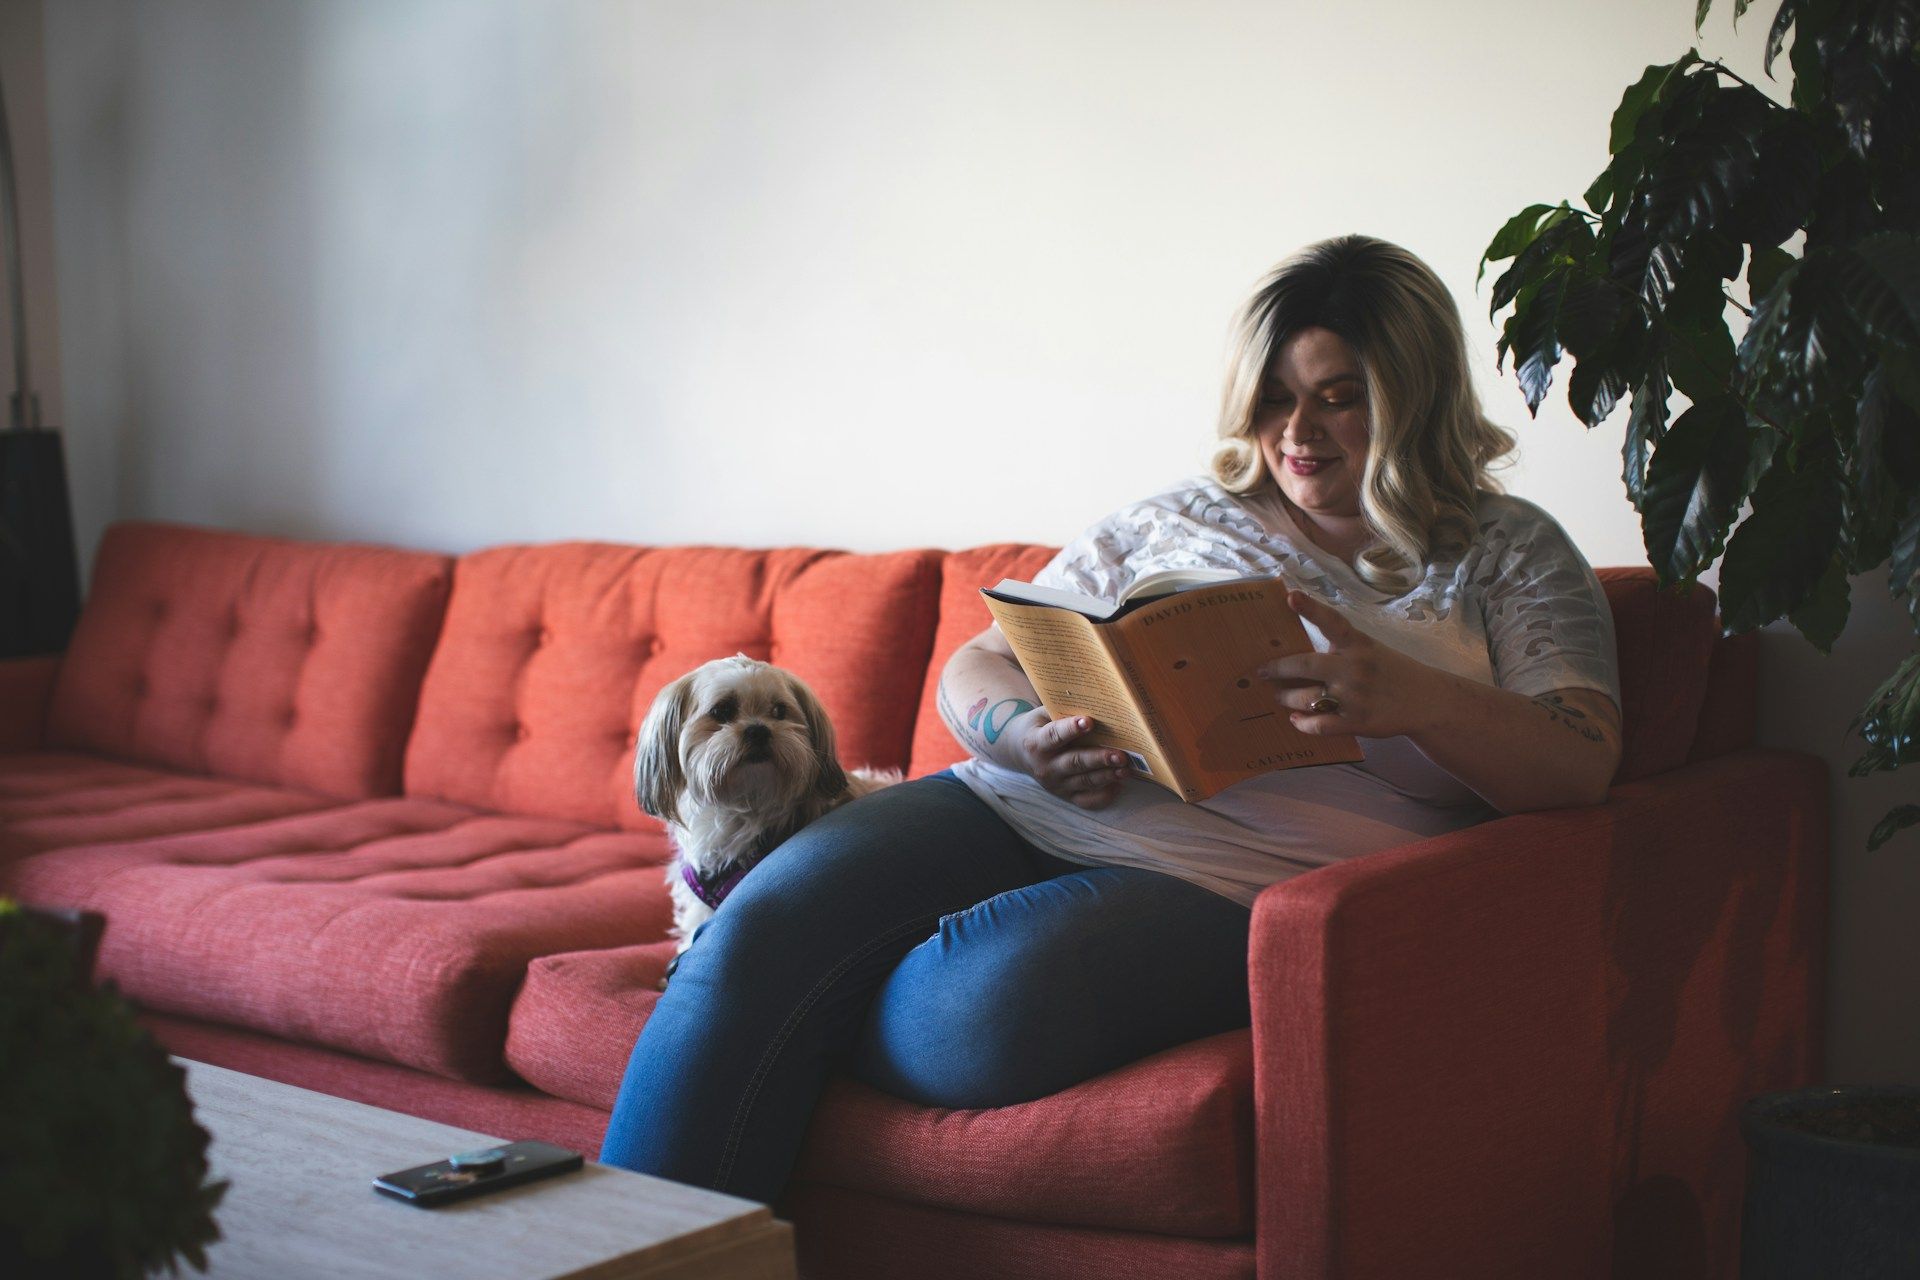 White plus size woman reading on couch with dog